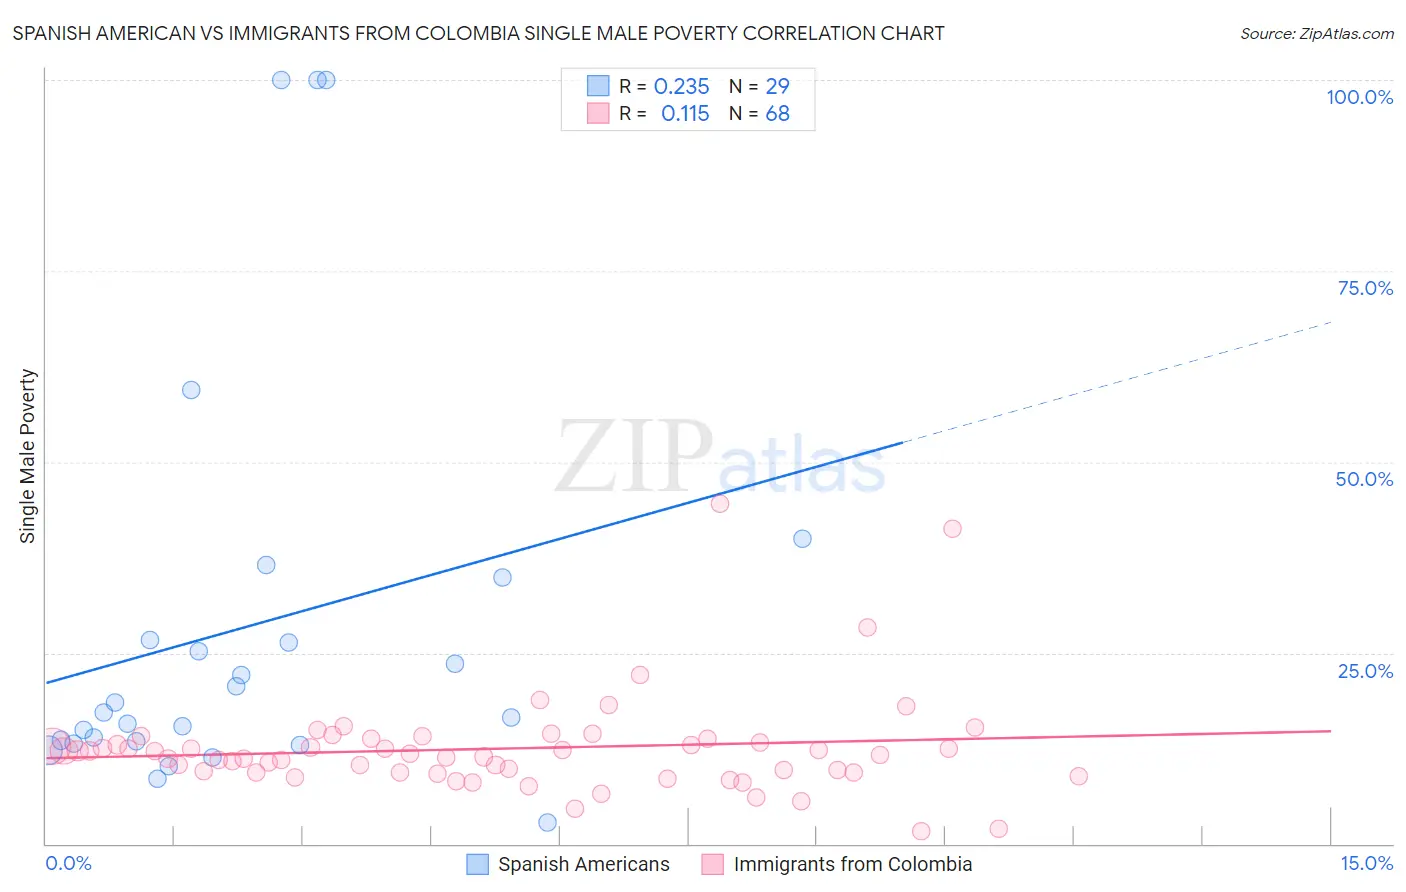 Spanish American vs Immigrants from Colombia Single Male Poverty